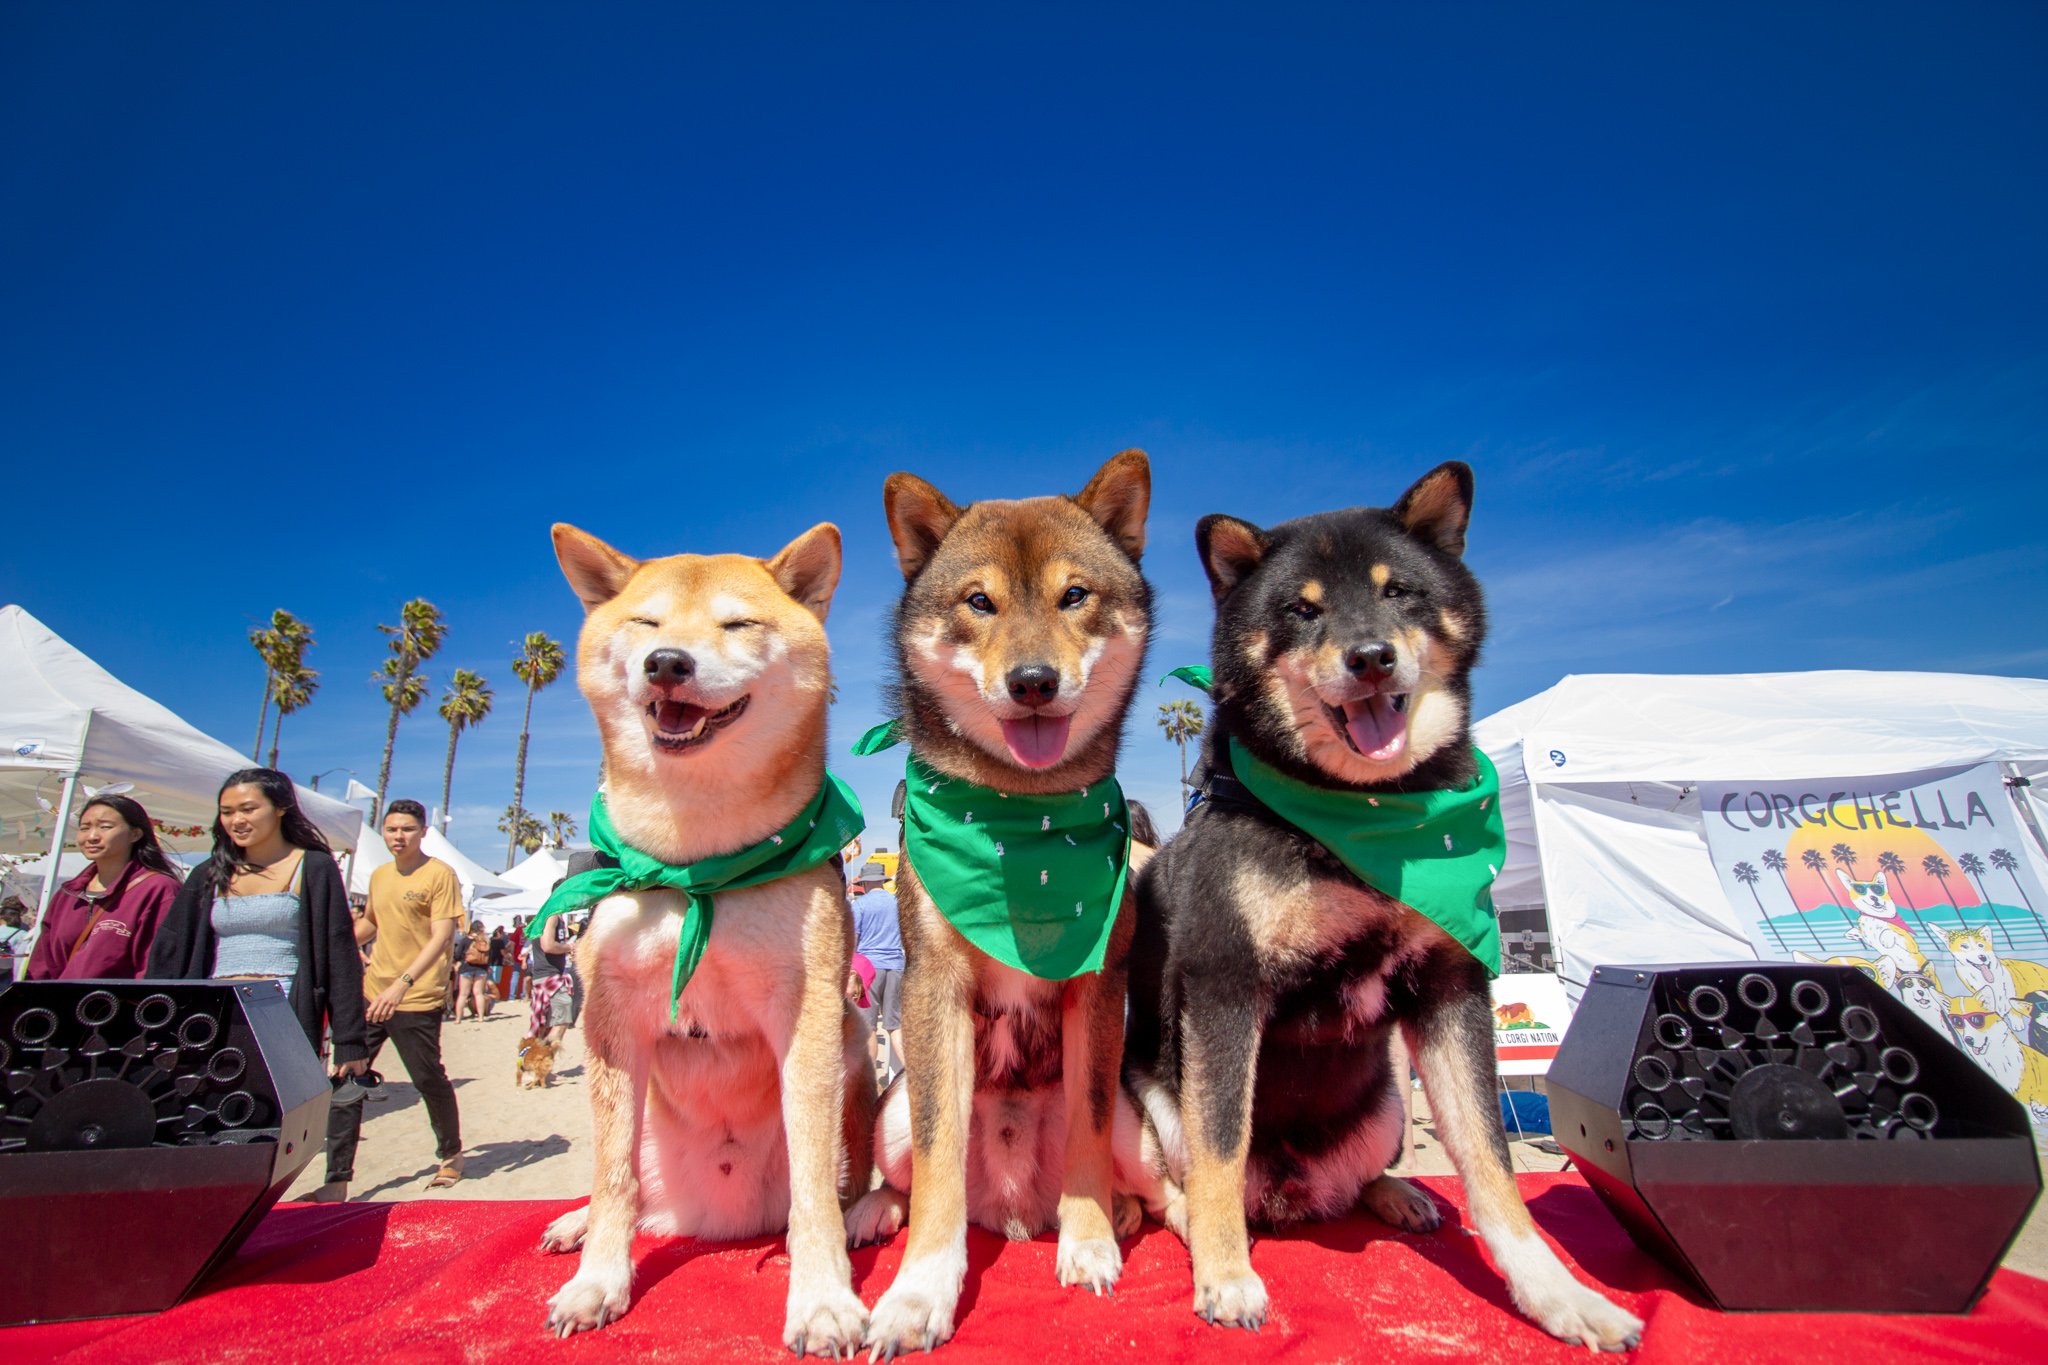 Orange County Pet and Dog Photography - by Steamer Lee - Corgi Beach Day Spring 2019 - Southern Caliornia 61.JPG